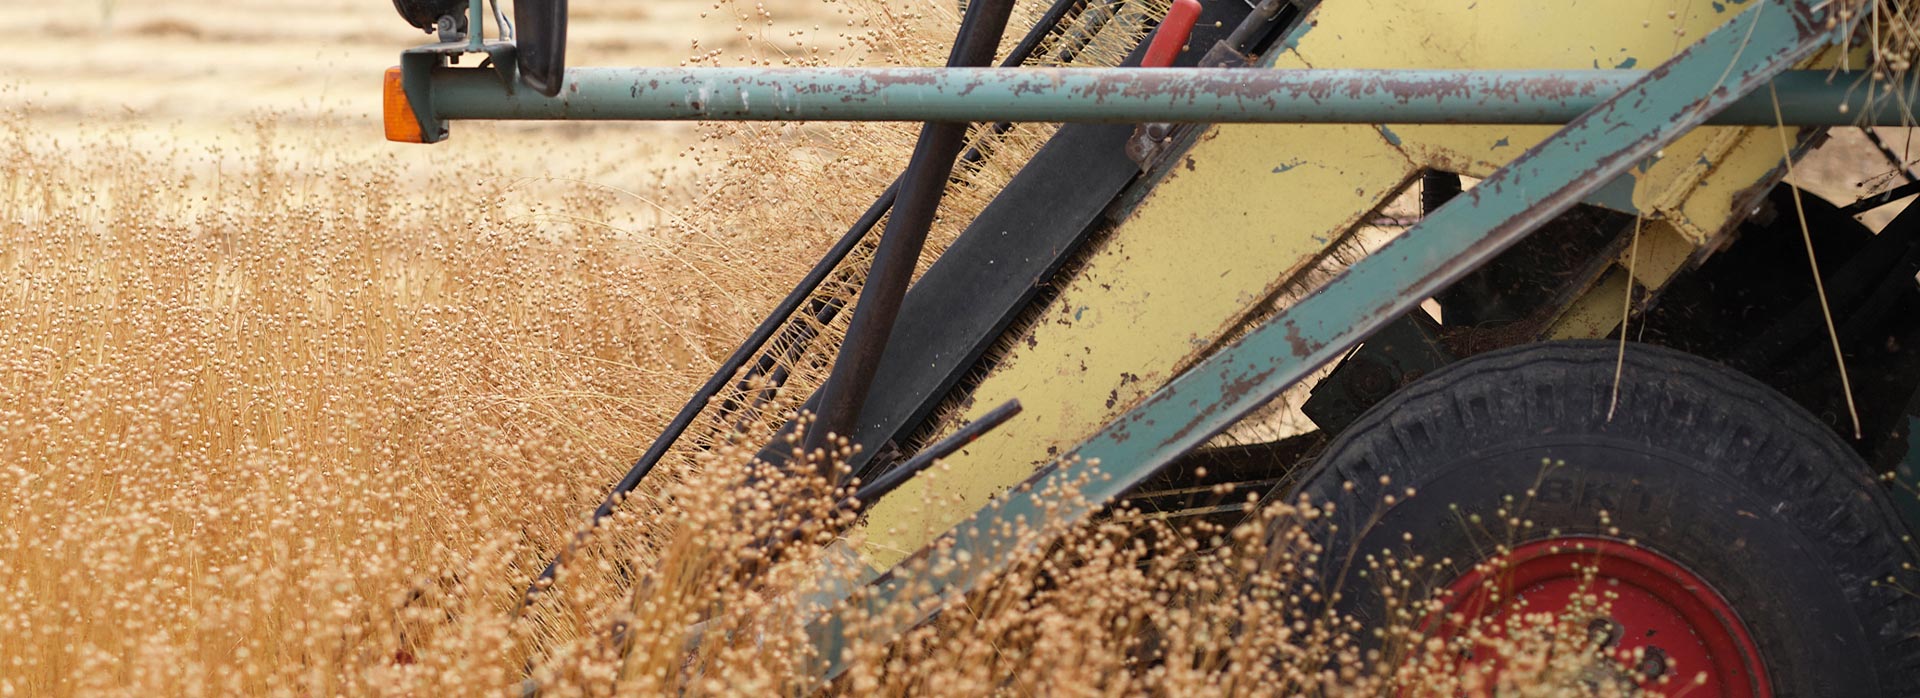 Detailed shot of a tractor harvesting flax, used to create Community Clothing linen garments.